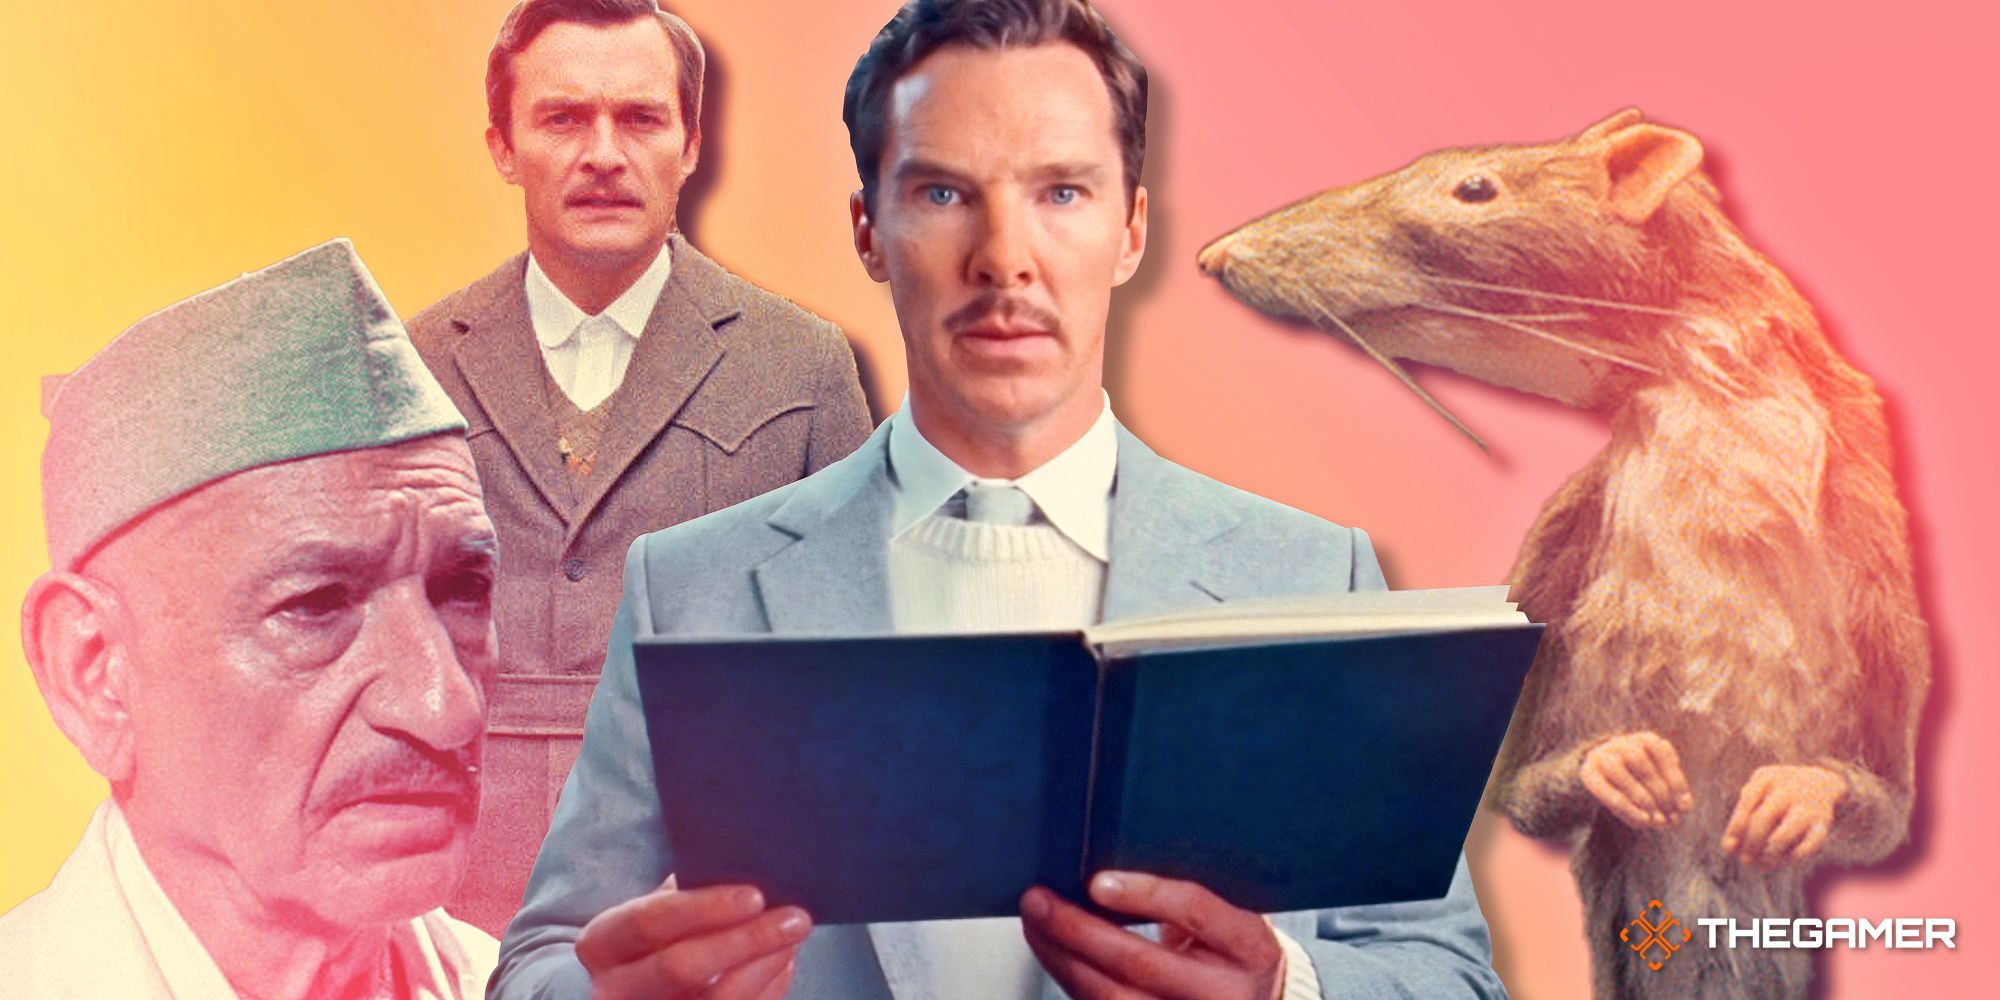 Benedict Cumberbatch holding a book in The Wonderful Story of Henry Sugar, flanked by characters from the other three Netflix shorts.